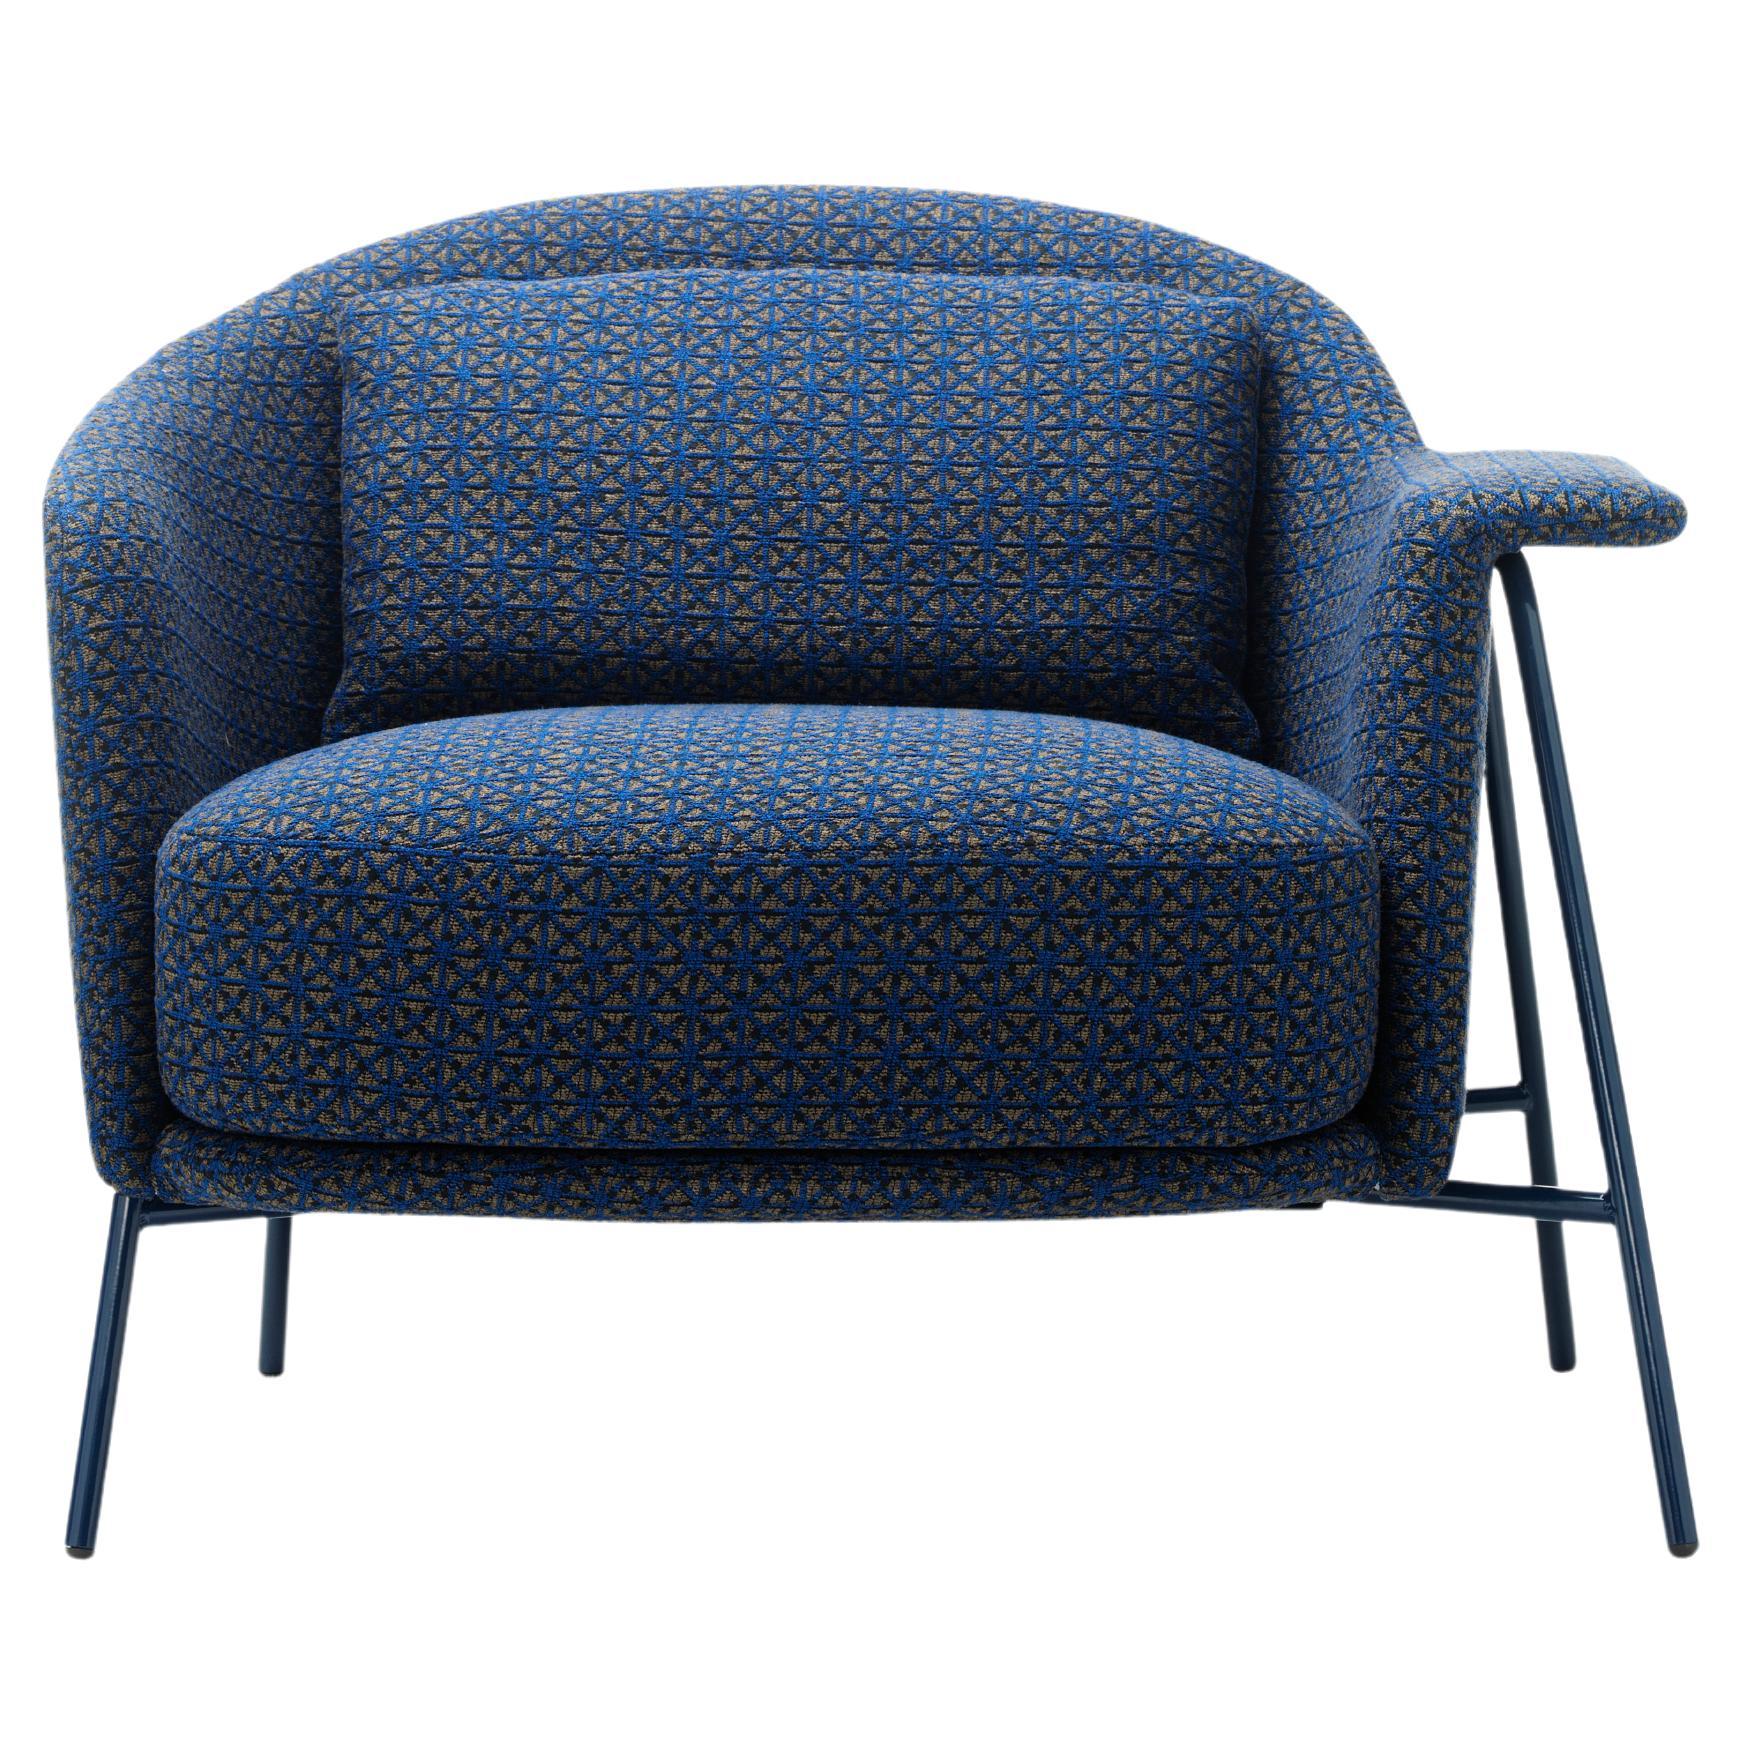 Kepi Armchair in Diplo Blue Upholstery with Blue Metal Feet by Emilio Nanni